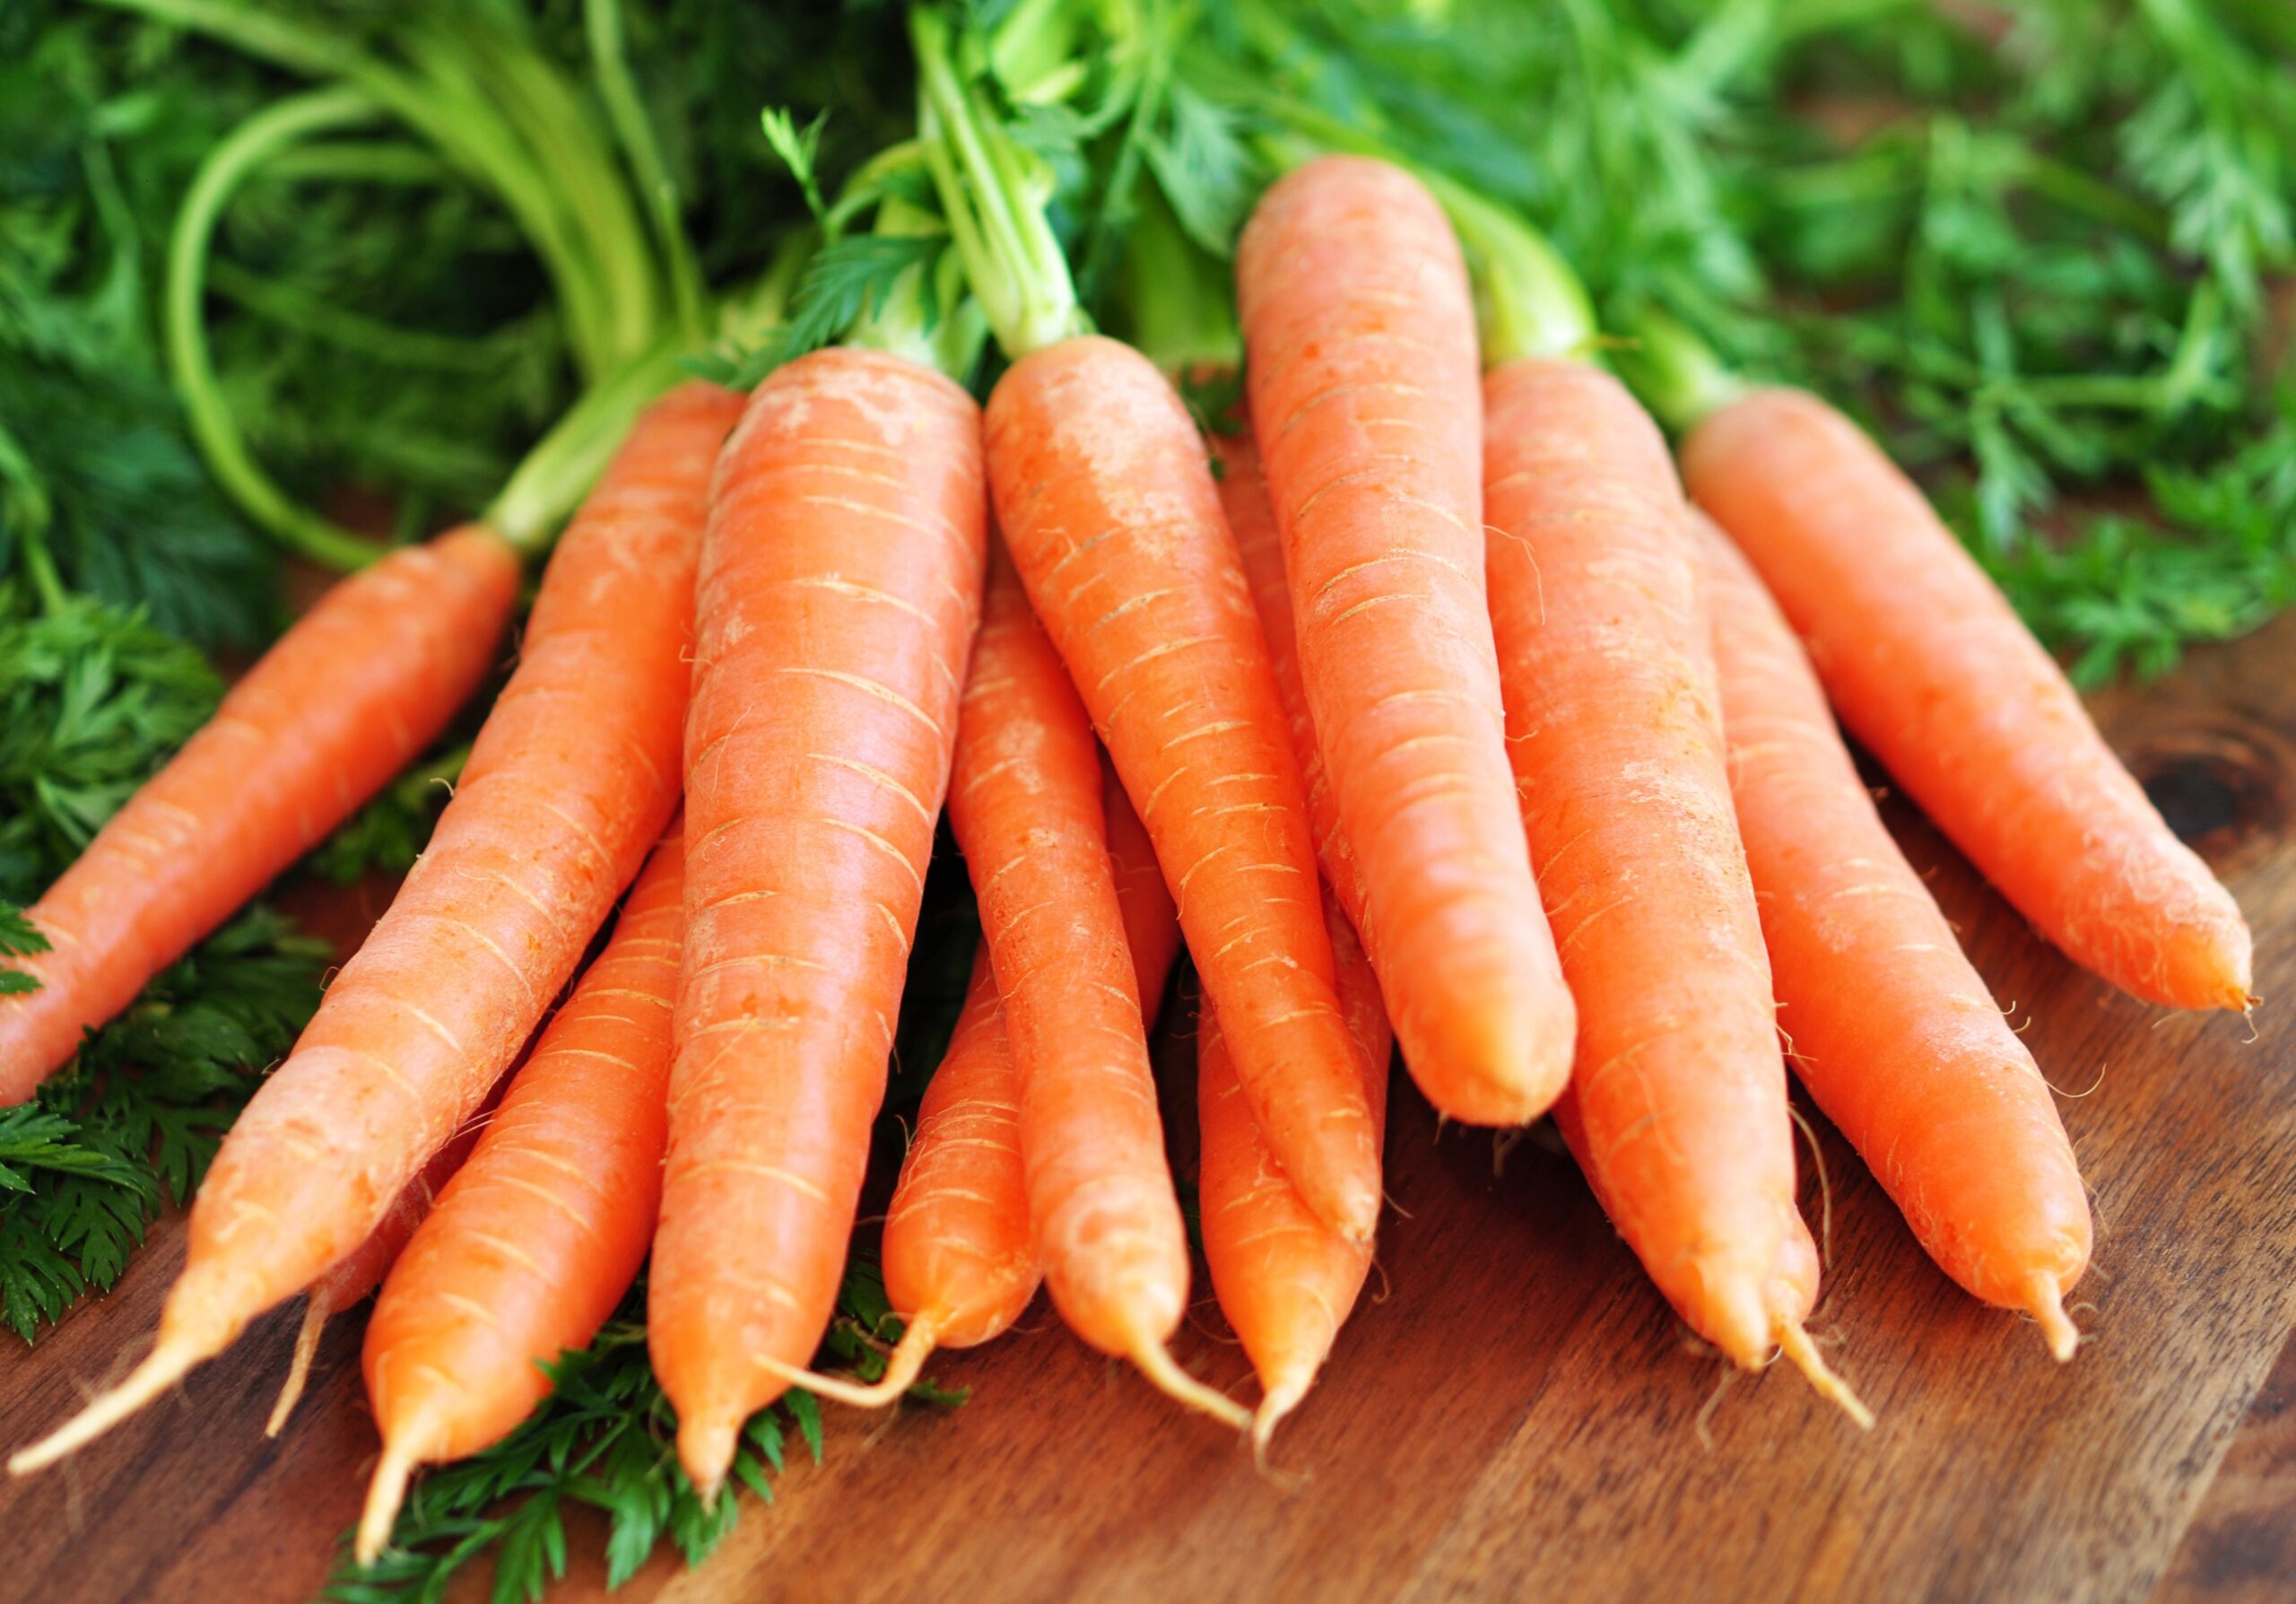 Nutrition: These foods provide high amounts of healthy beta-carotene